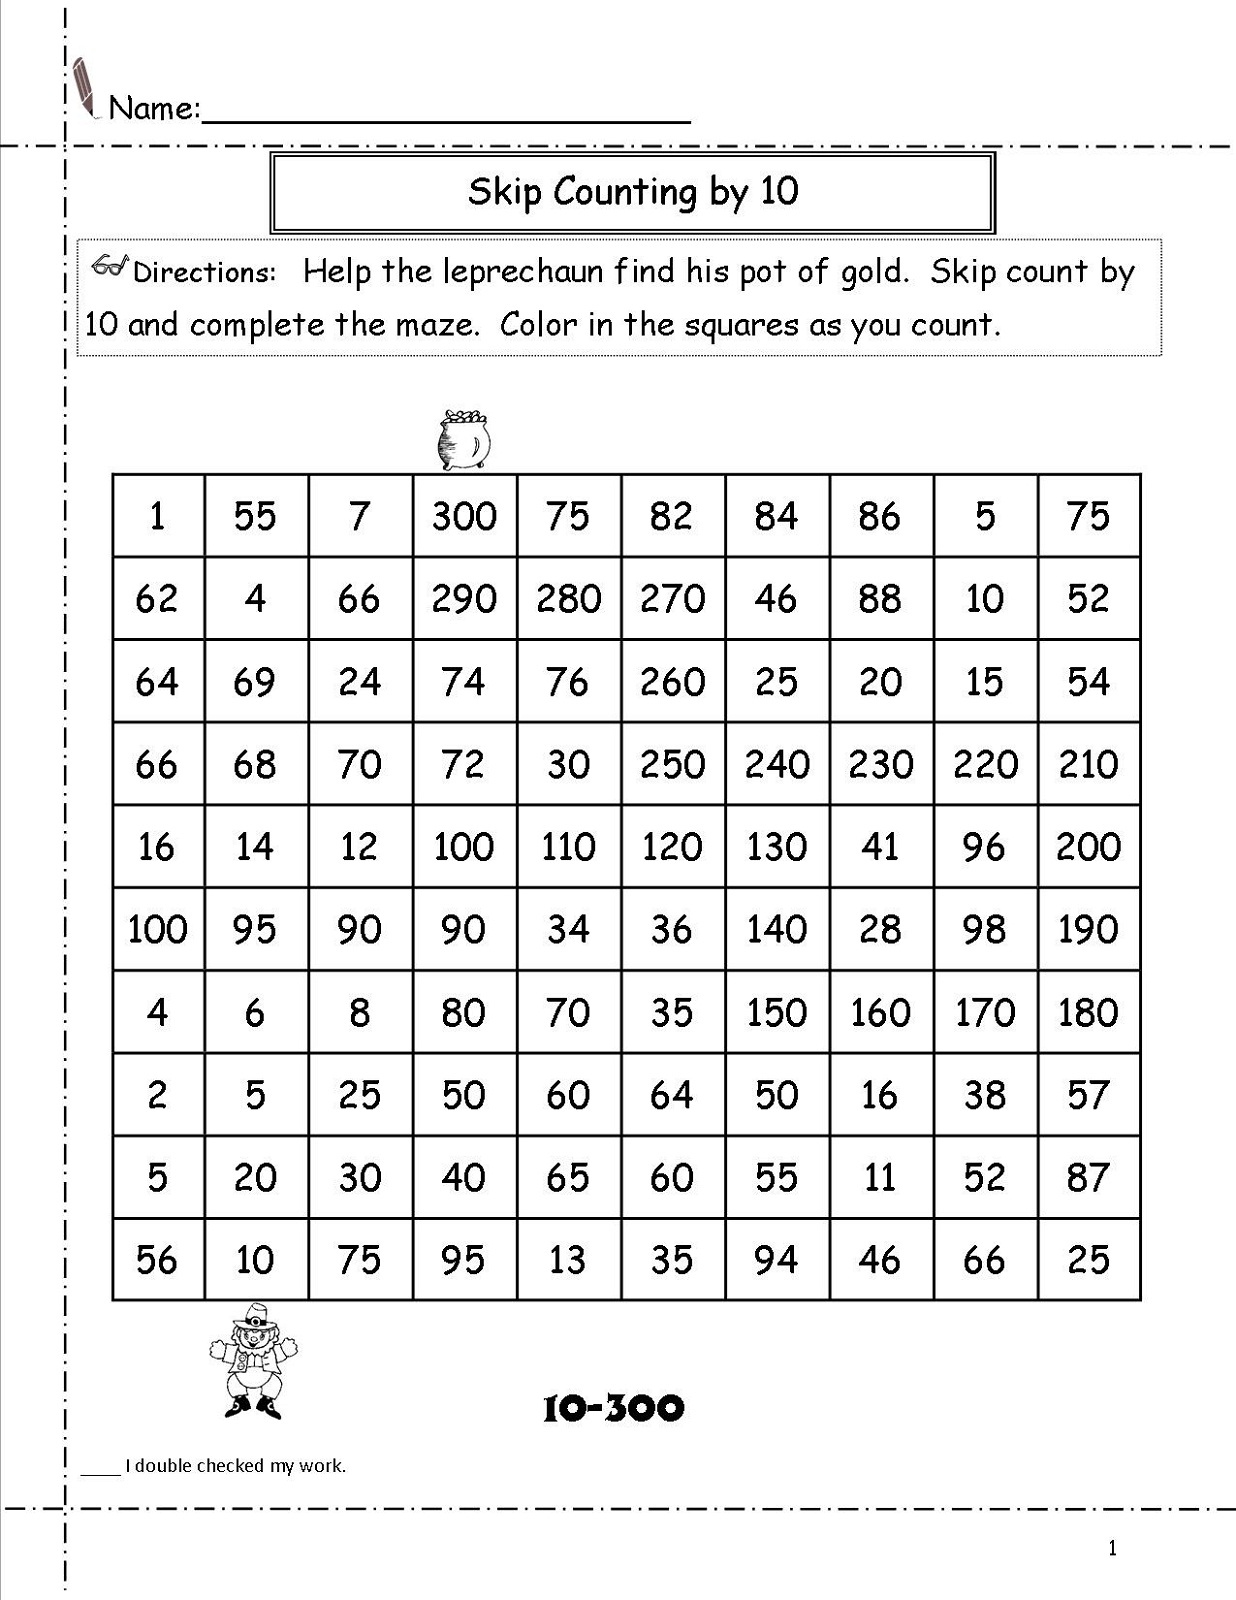 skip-count-by-10-worksheets-activity-shelter